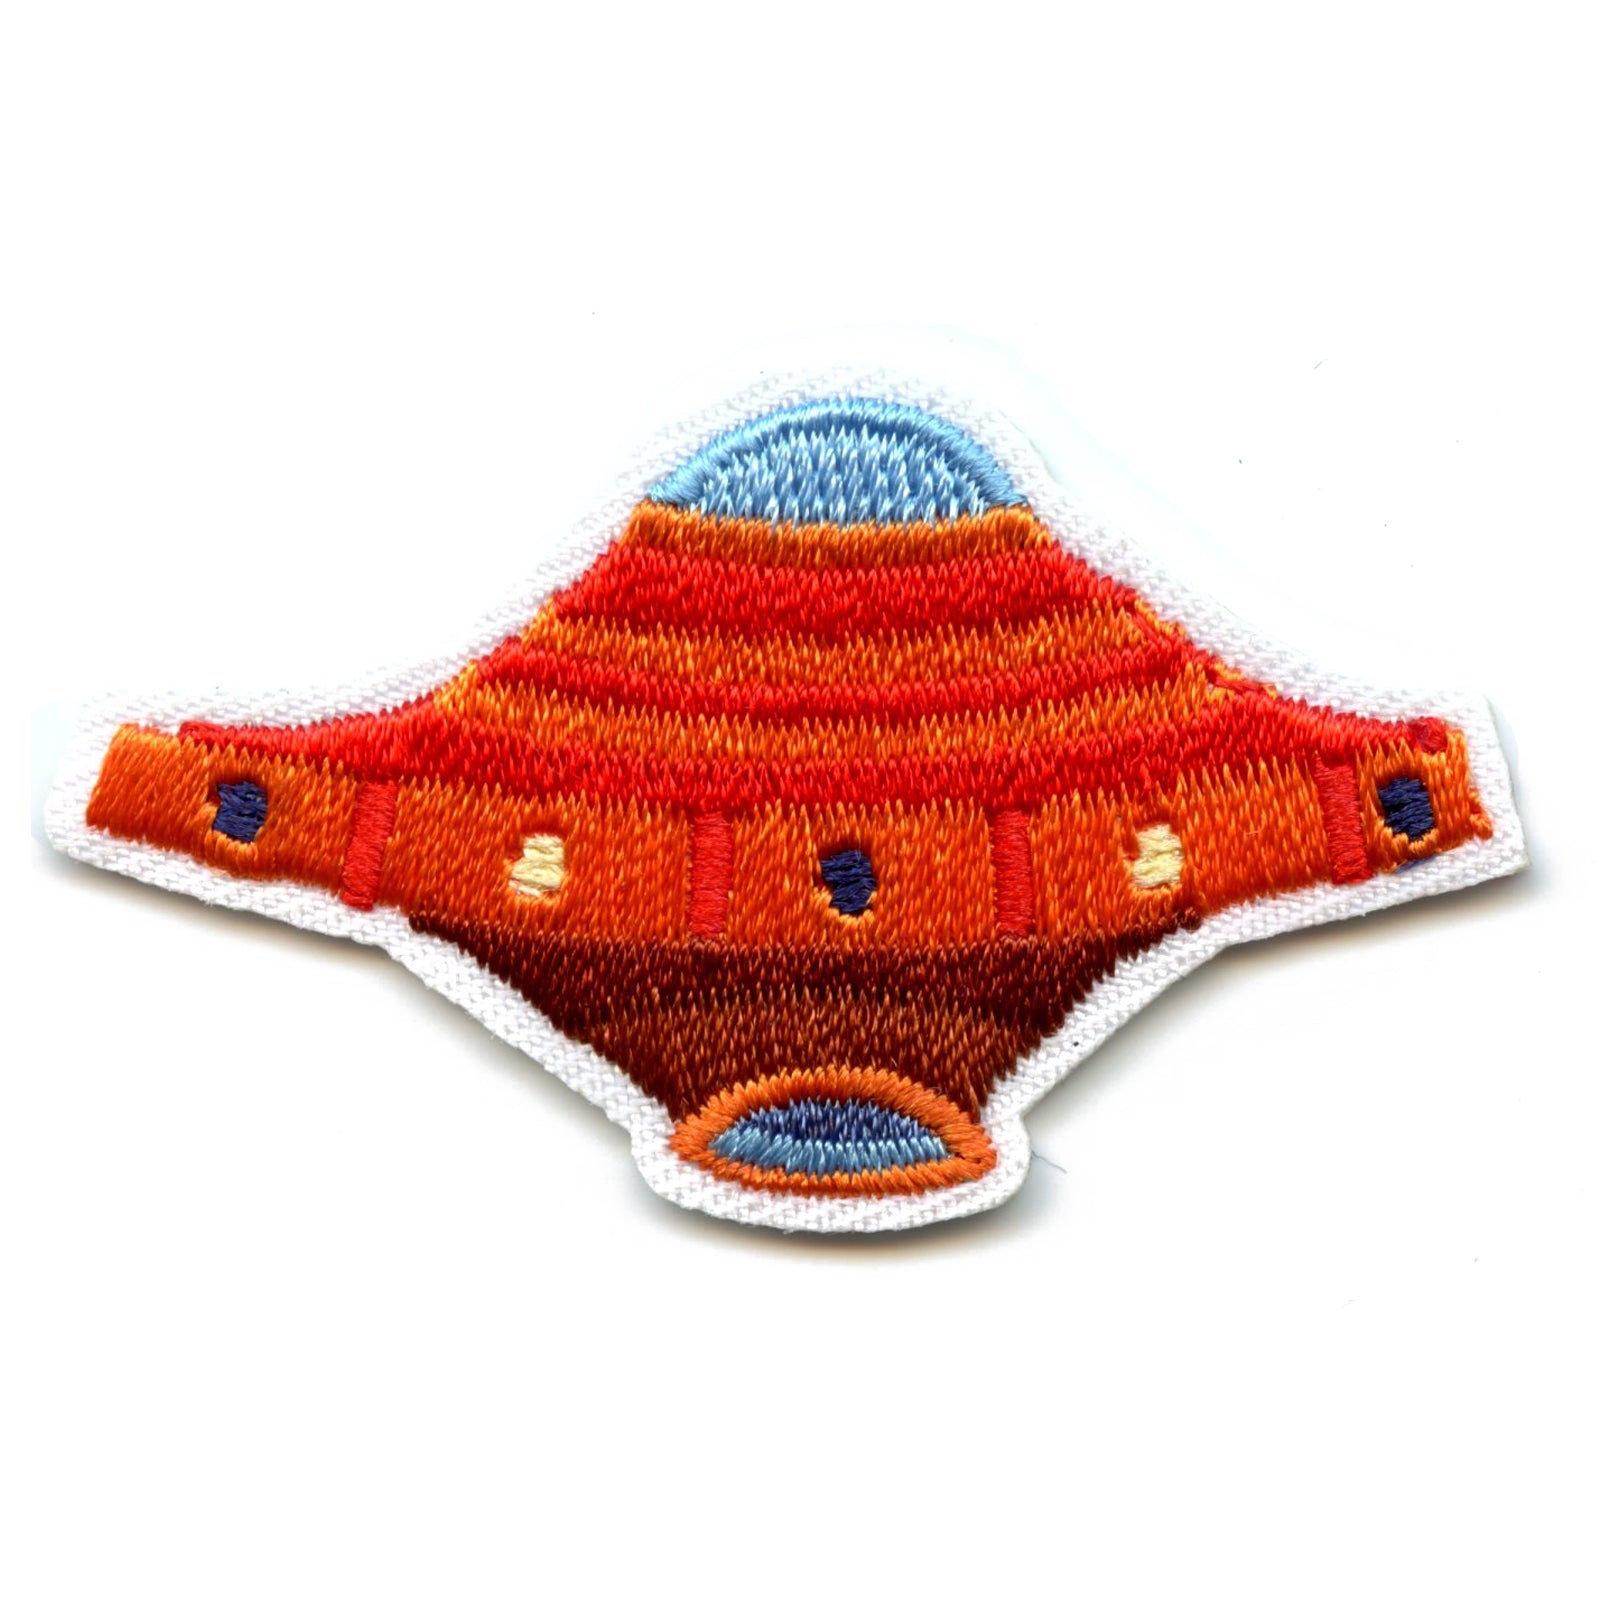 Small Orange UFO Alien Spaceship Embroidered Iron On Patch 